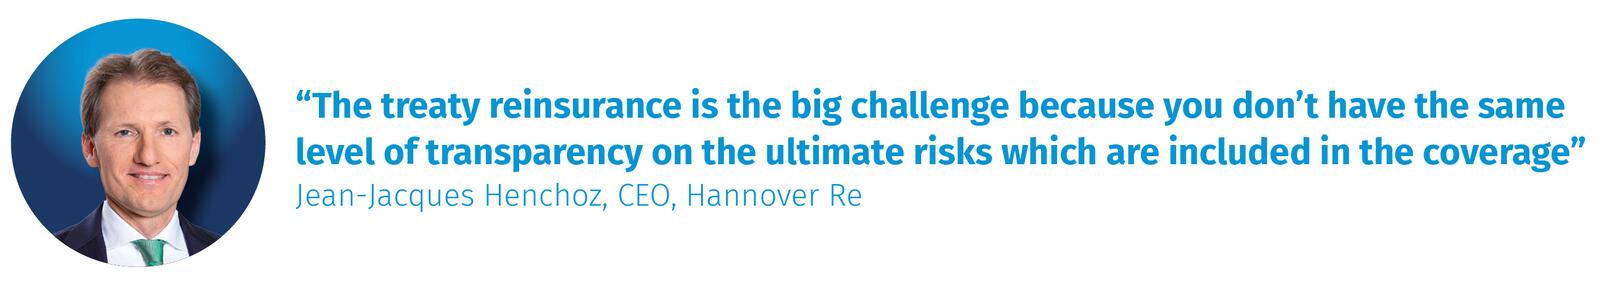 Jean-Jacques Henchoz, CEO, Hannover Re